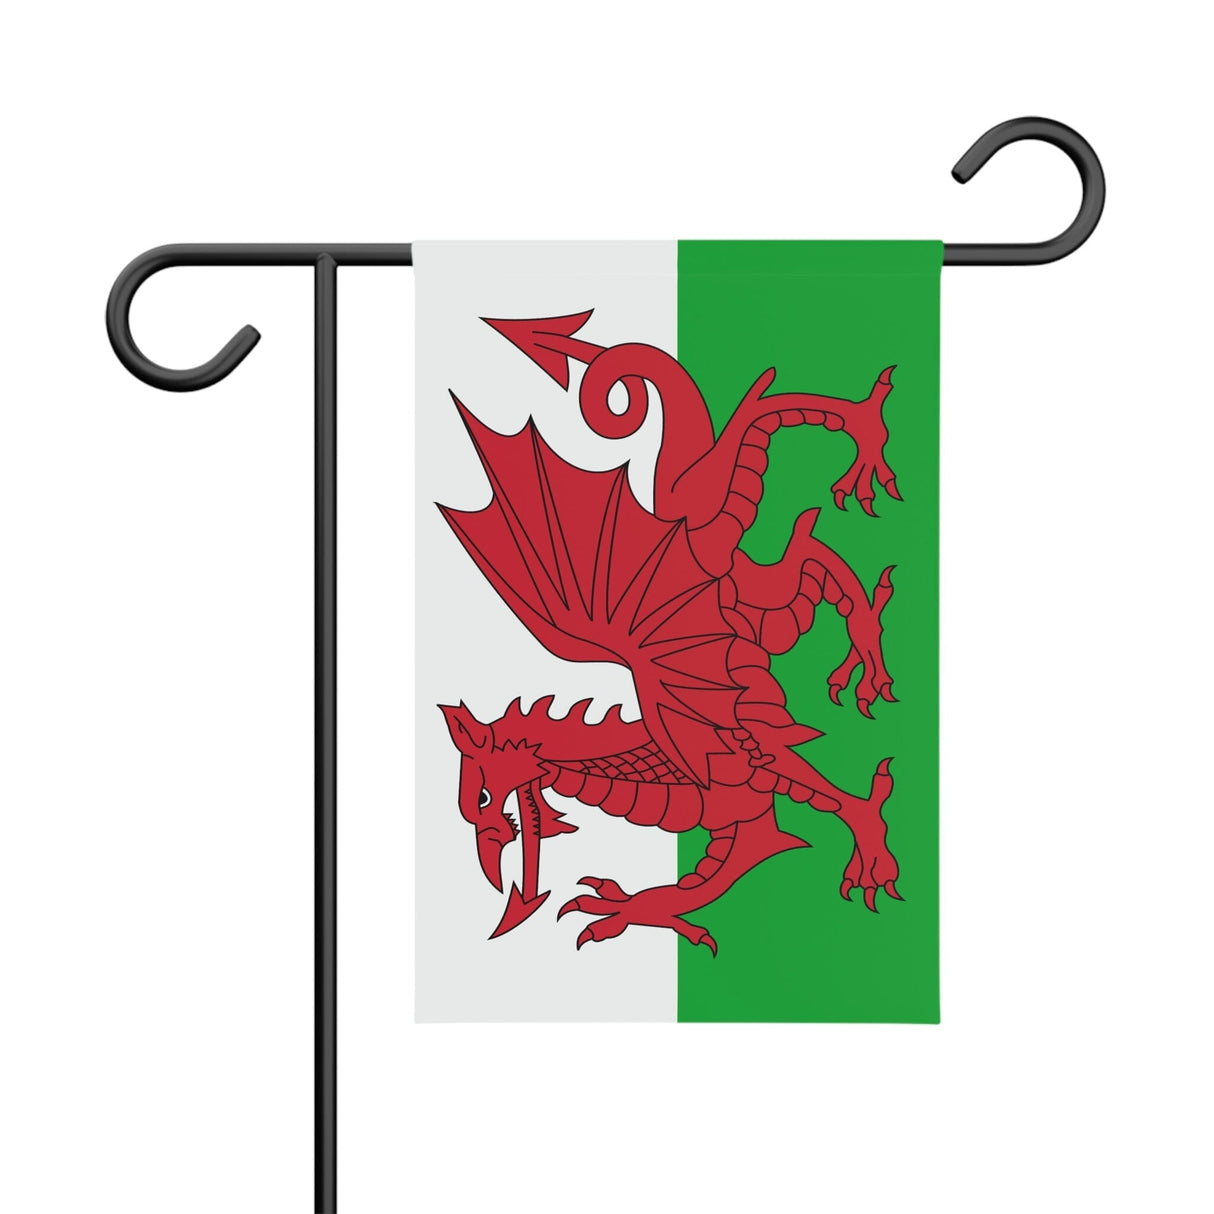 Flag Garden of Wales 100% Polyester Double-Sided Print - Pixelforma